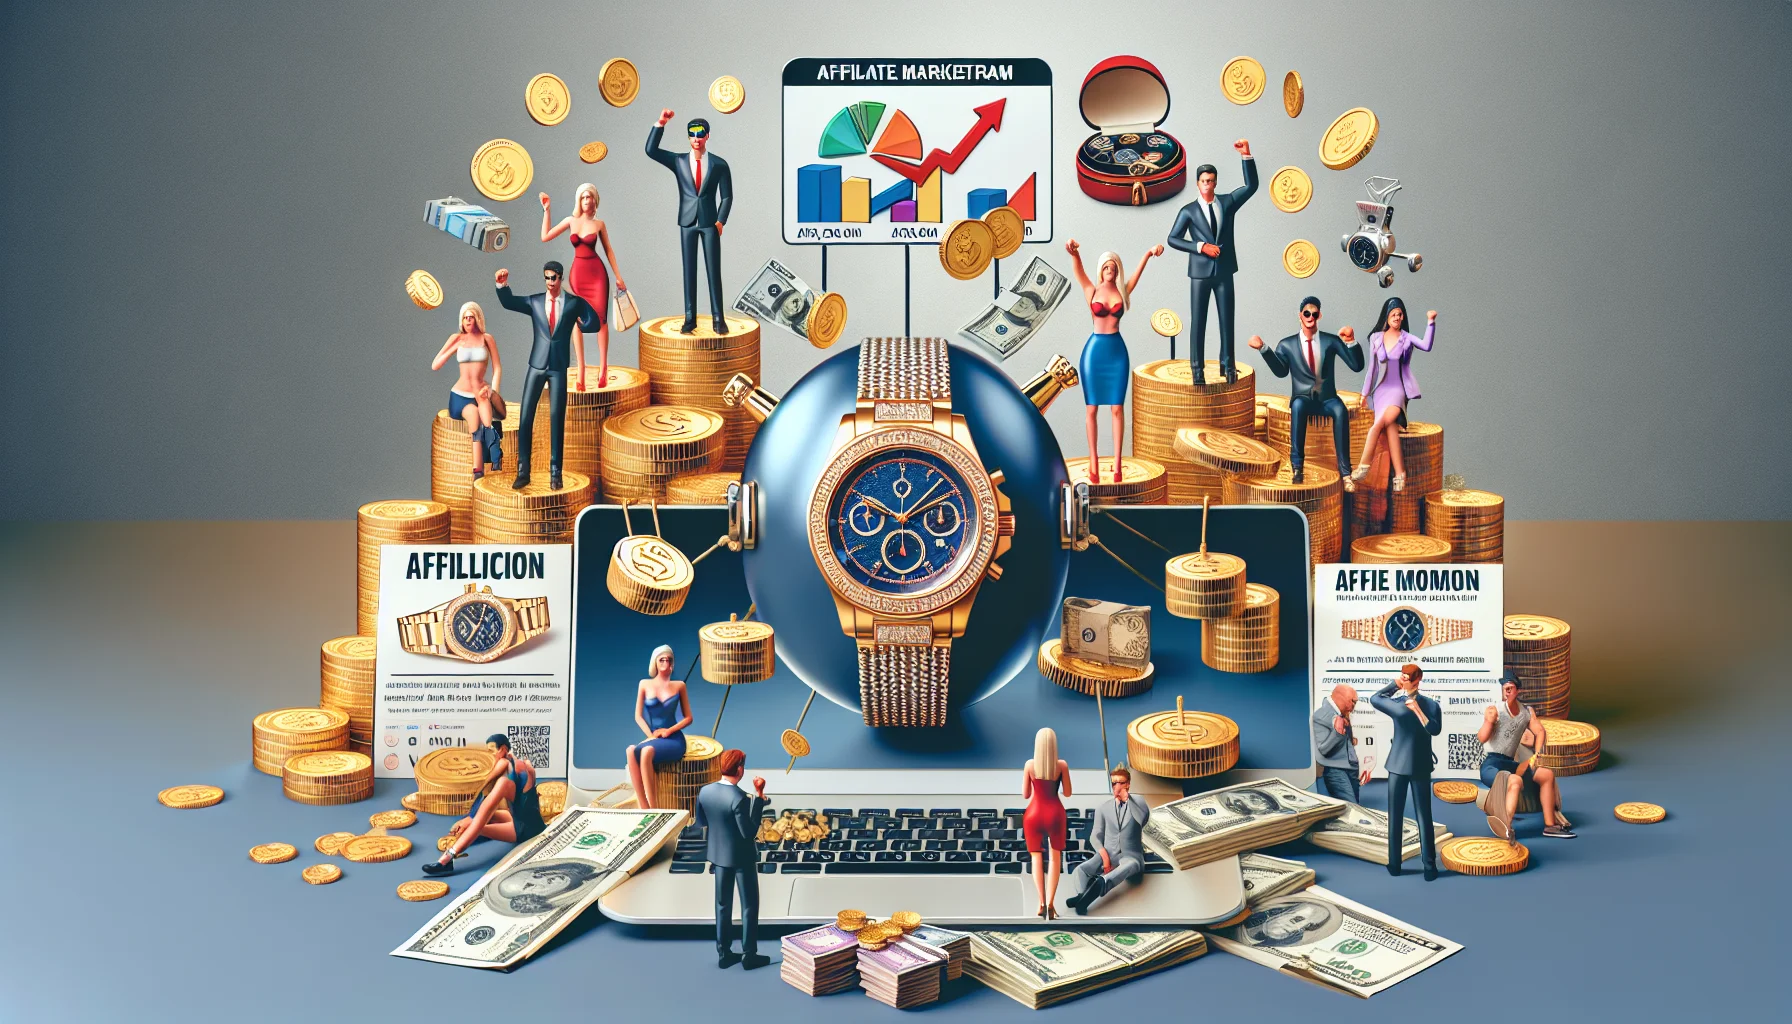 Create a humorous and realistic image that represents an affiliate marketing program of a high-end luxury watch brand. The scenario should be enticing, displaying elements associated with making money online. Include visual cues like digital devices showing growth in sales, heaps of coins symbolizing profits, glossy brochures showcasing the luxurious watches, and individuals of various descents and genders, celebrating their earnings. Avoid showing any identifiable brand logos or symbols.